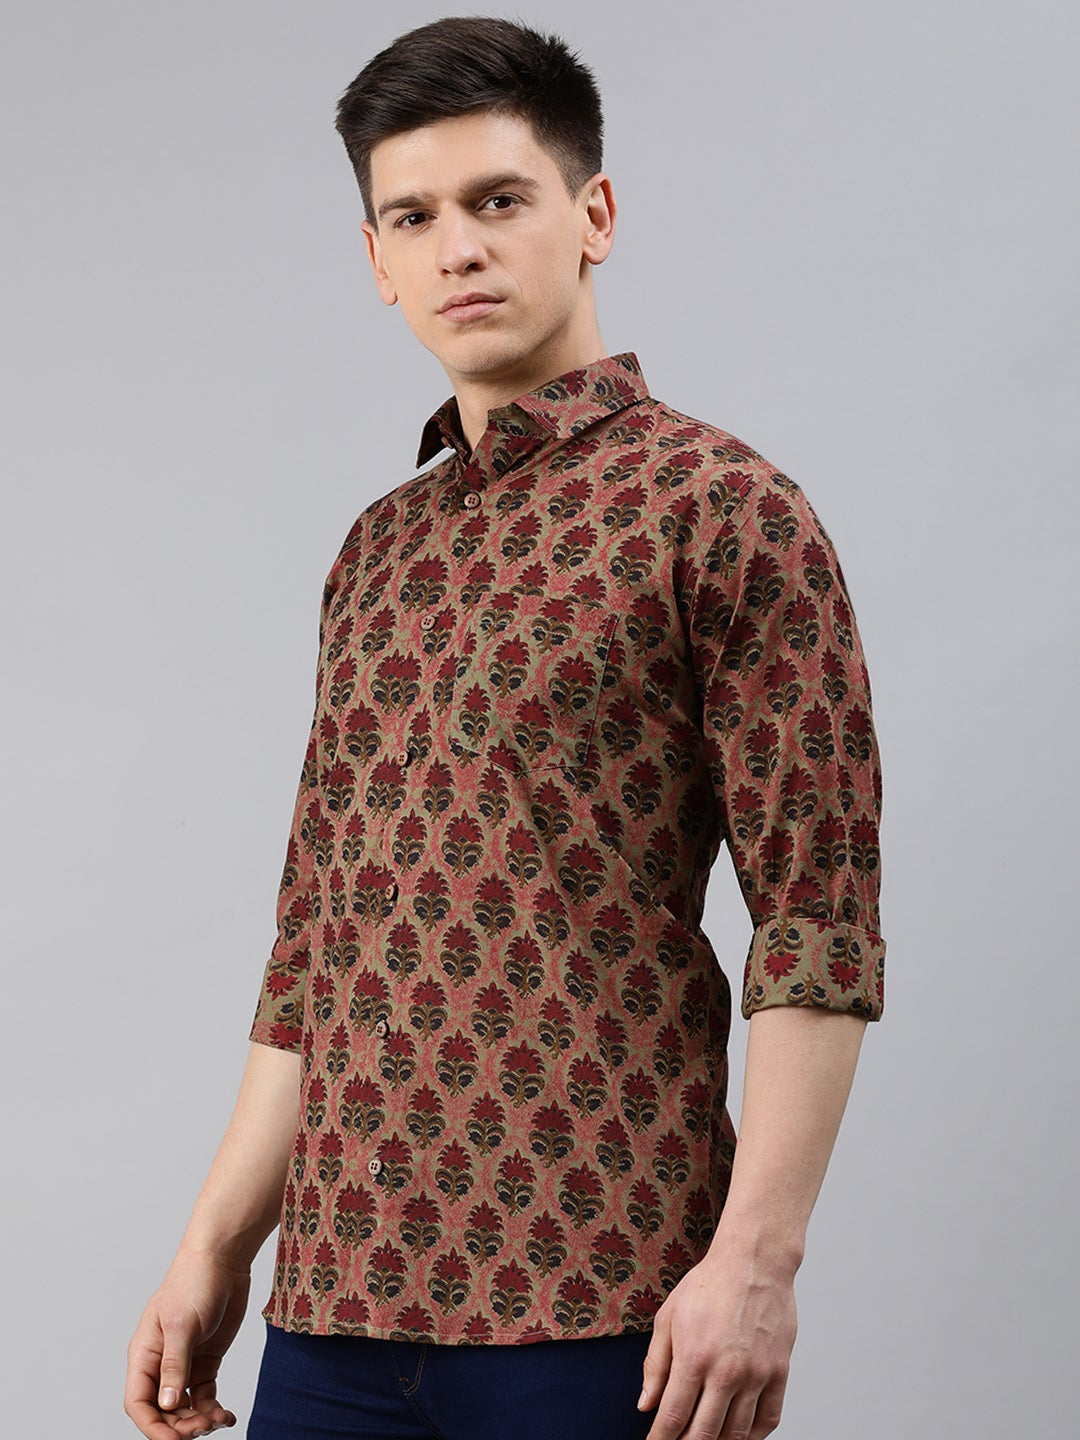 Brown Cotton Full Sleeves Shirts For Men